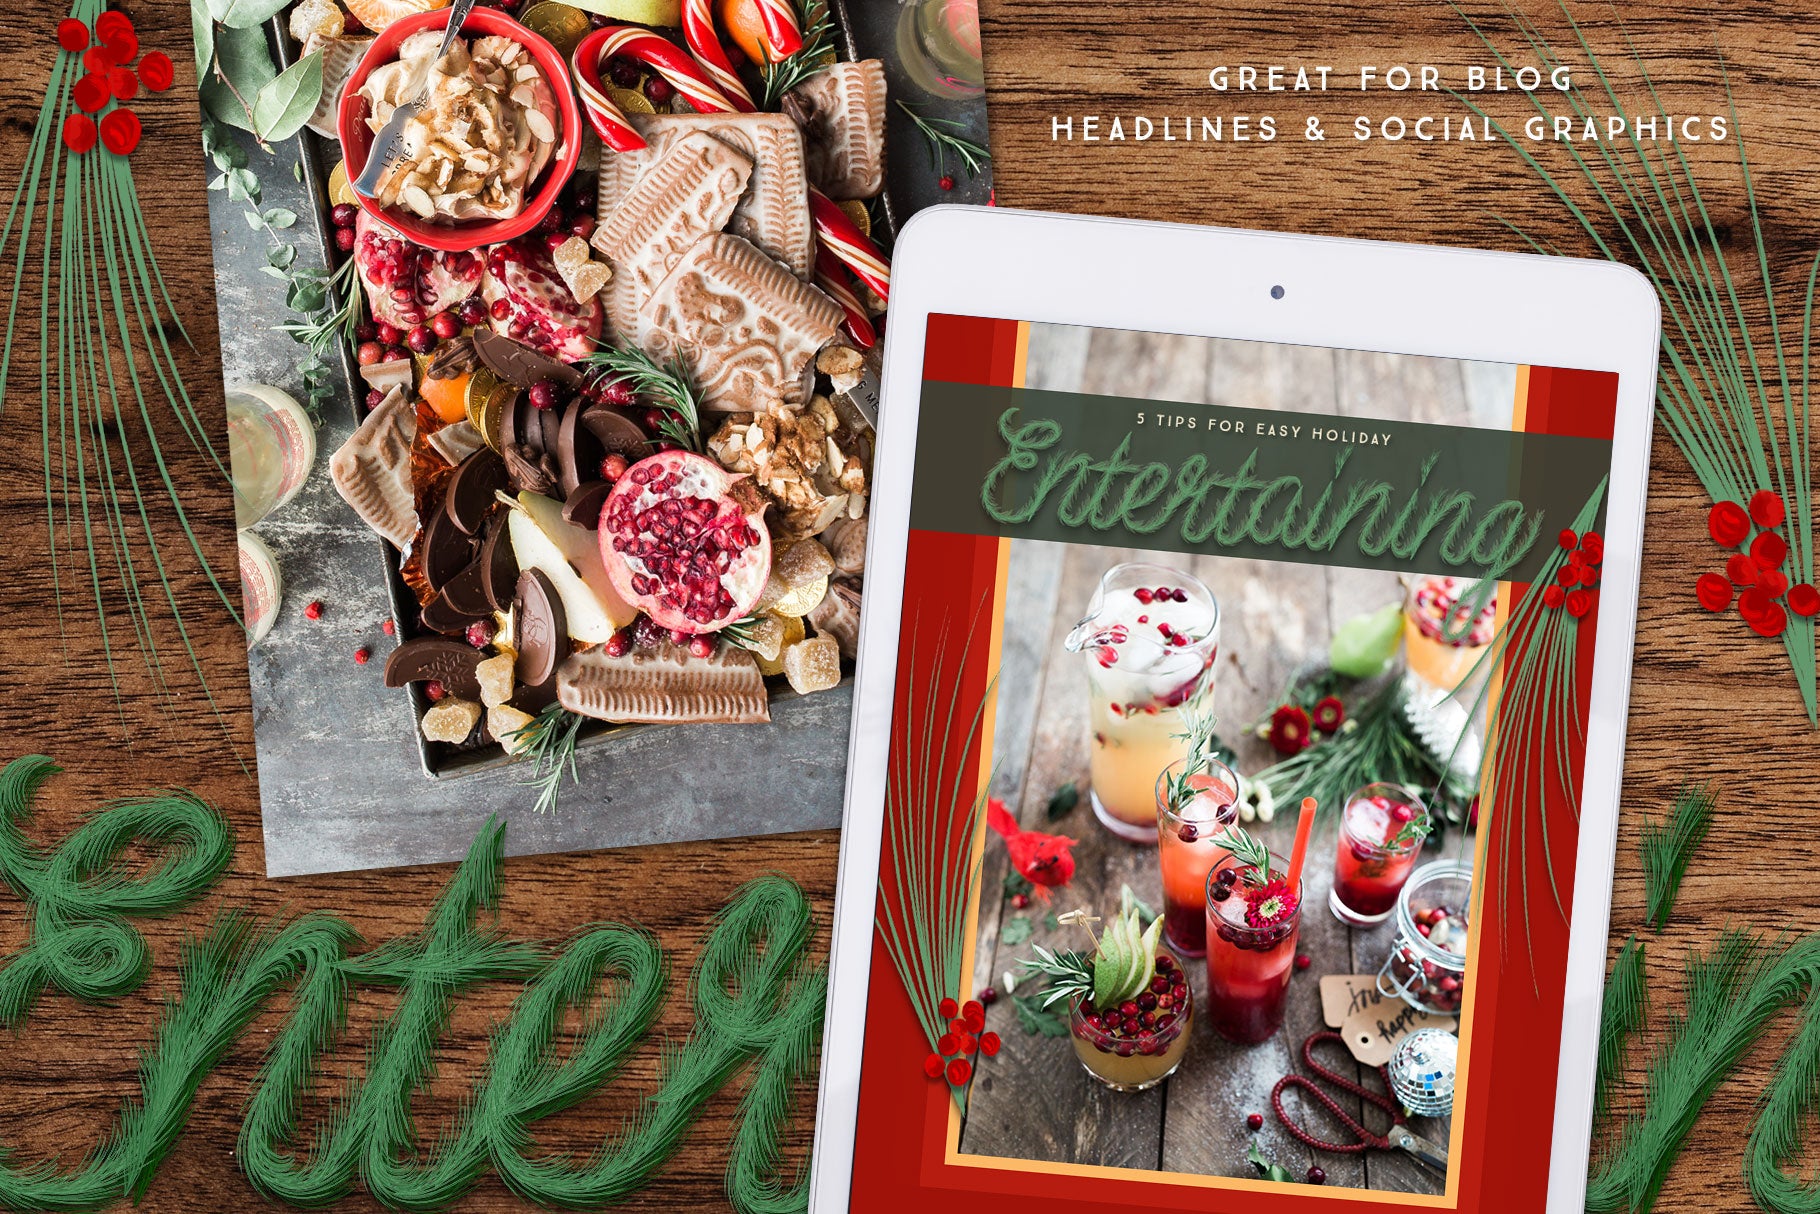 Luxe Christmas & Holiday Greenery Alphabets: use for headlines and social graphics